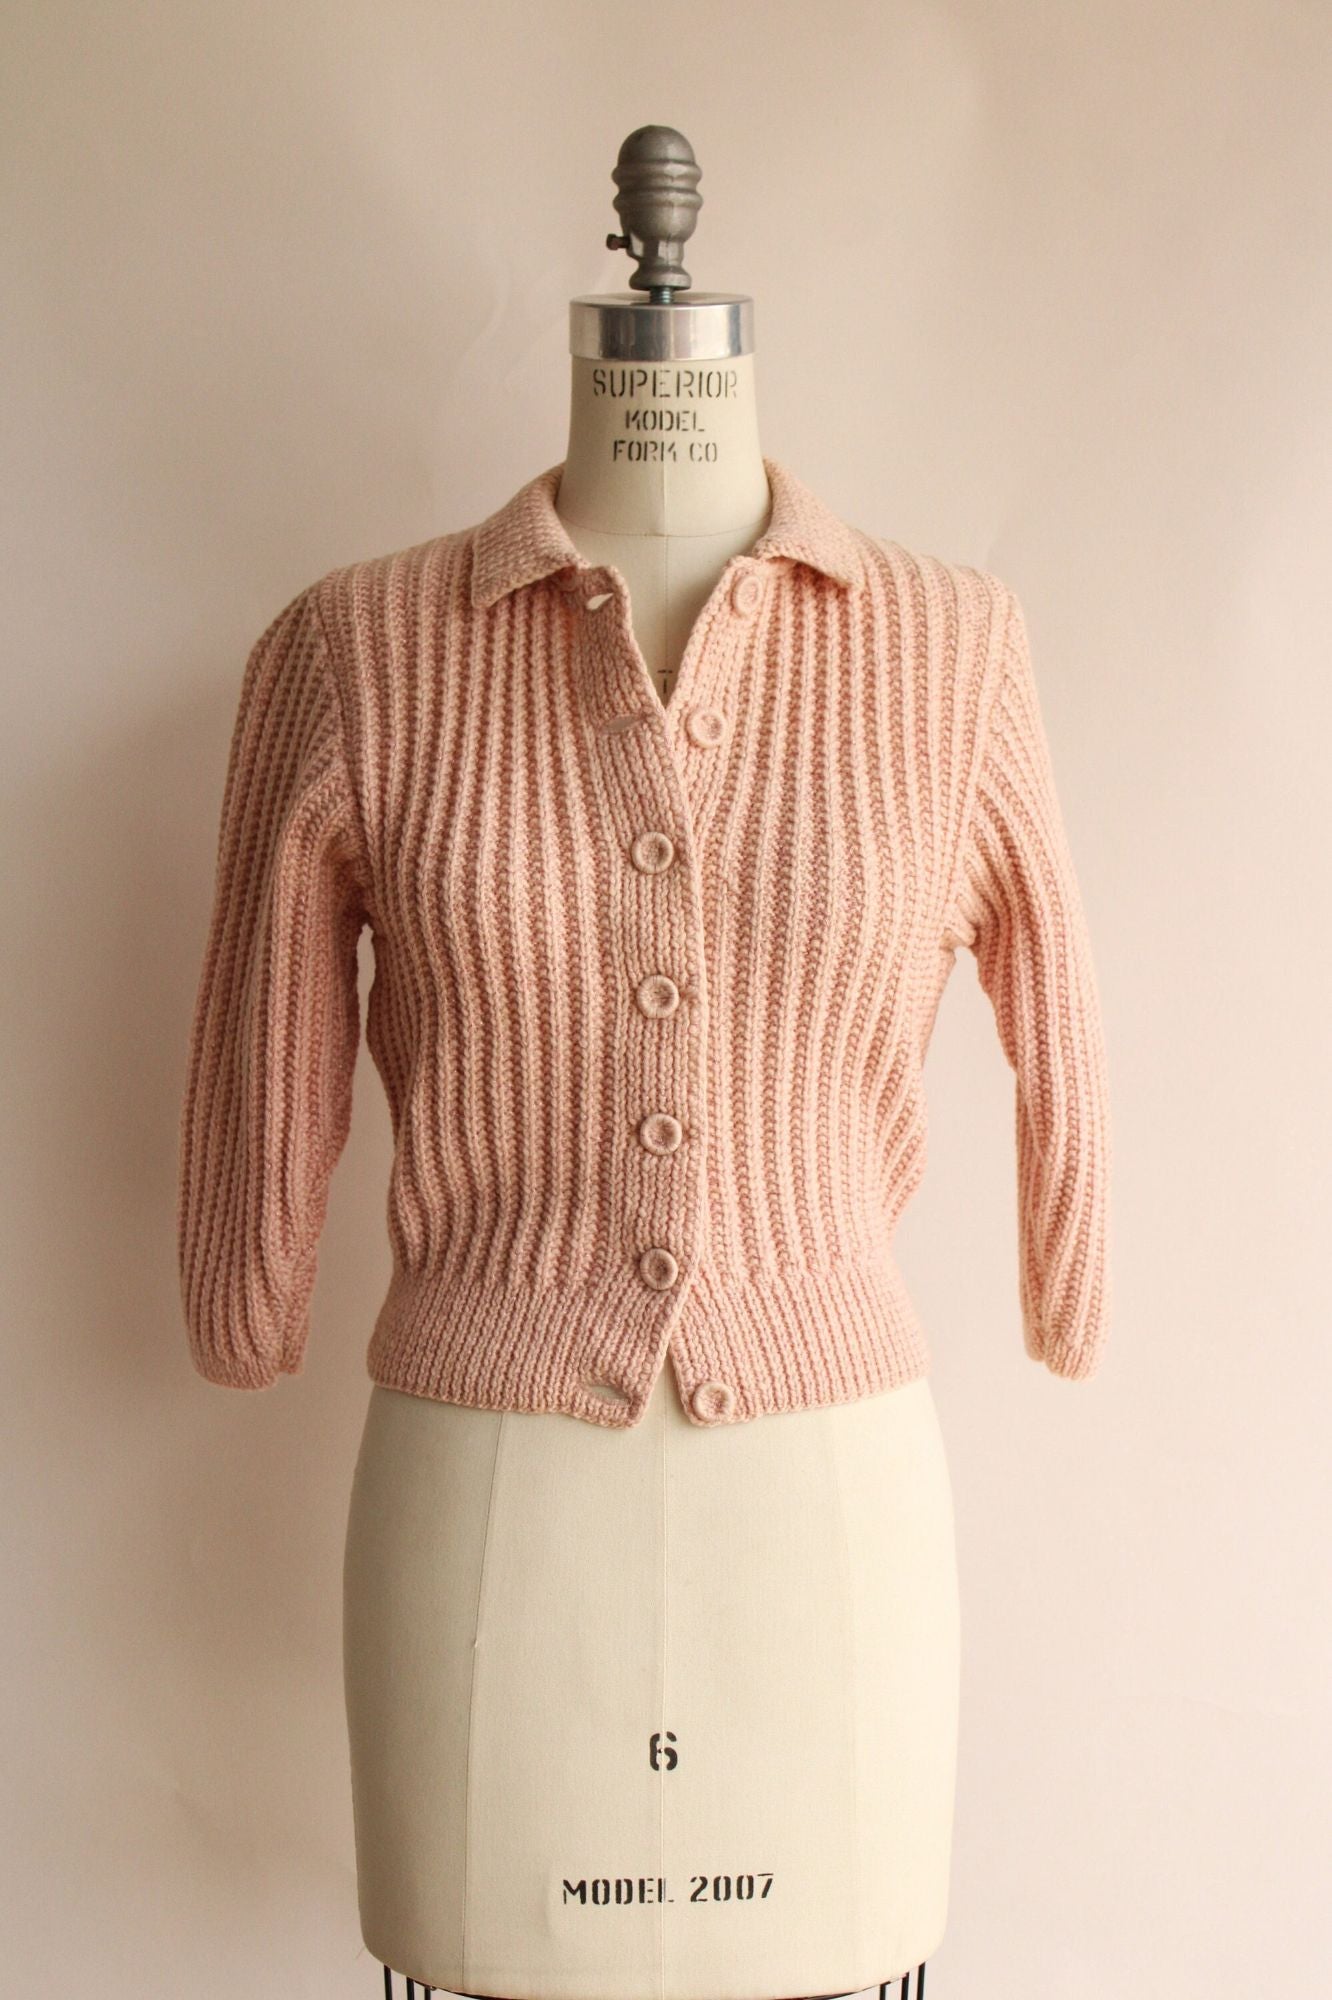 Vintage 1950s Pink Knit Cardigan With Collar